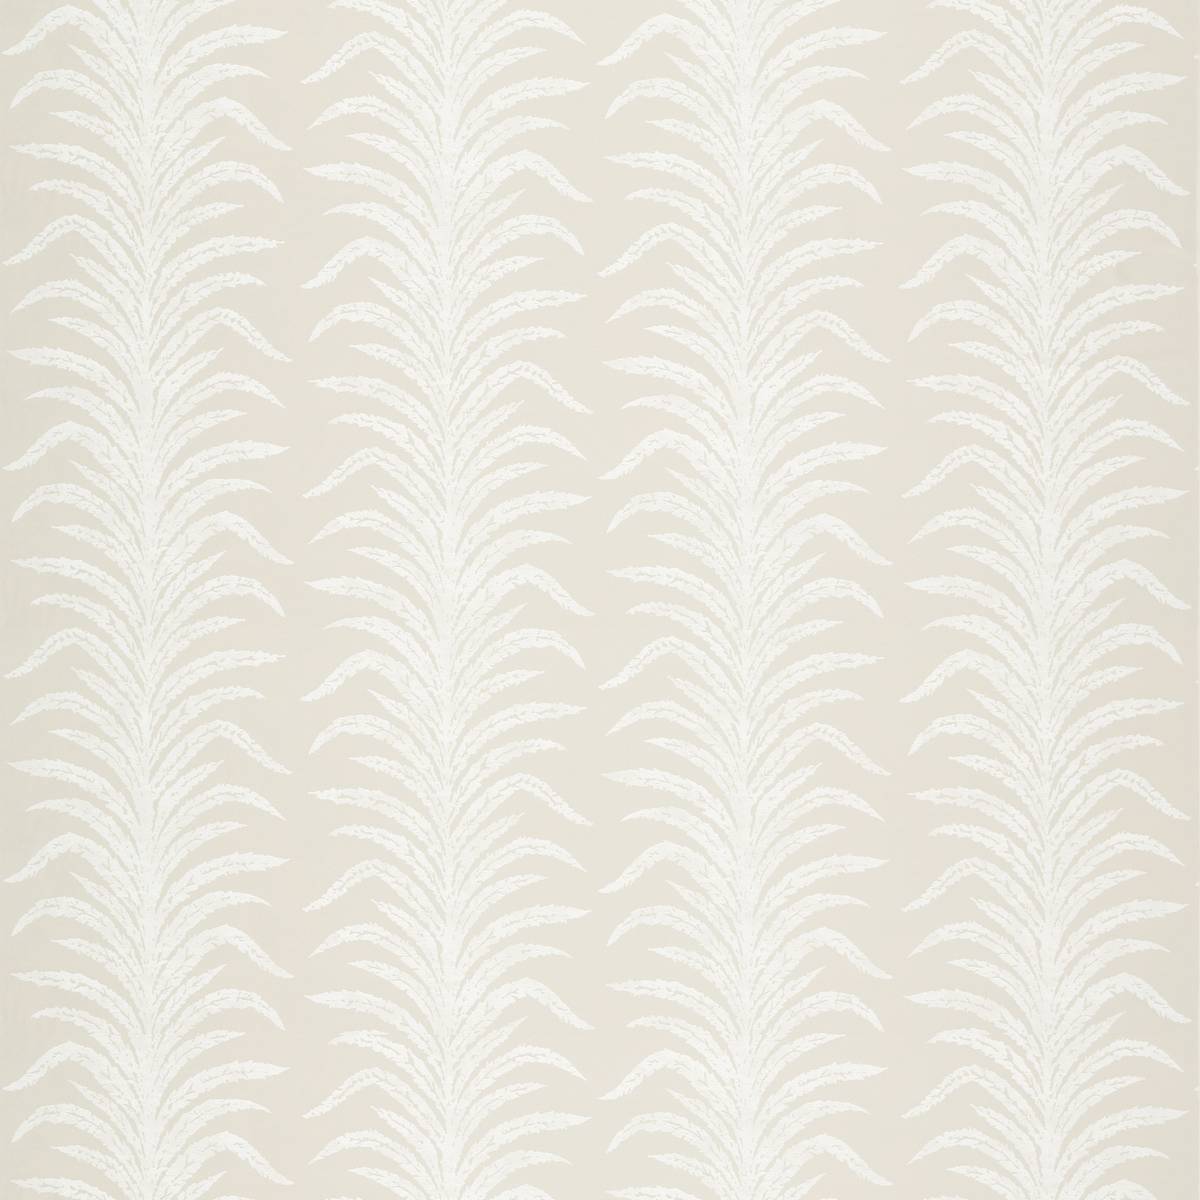 Tree Fern Weave Orchid White Fabric by Sanderson